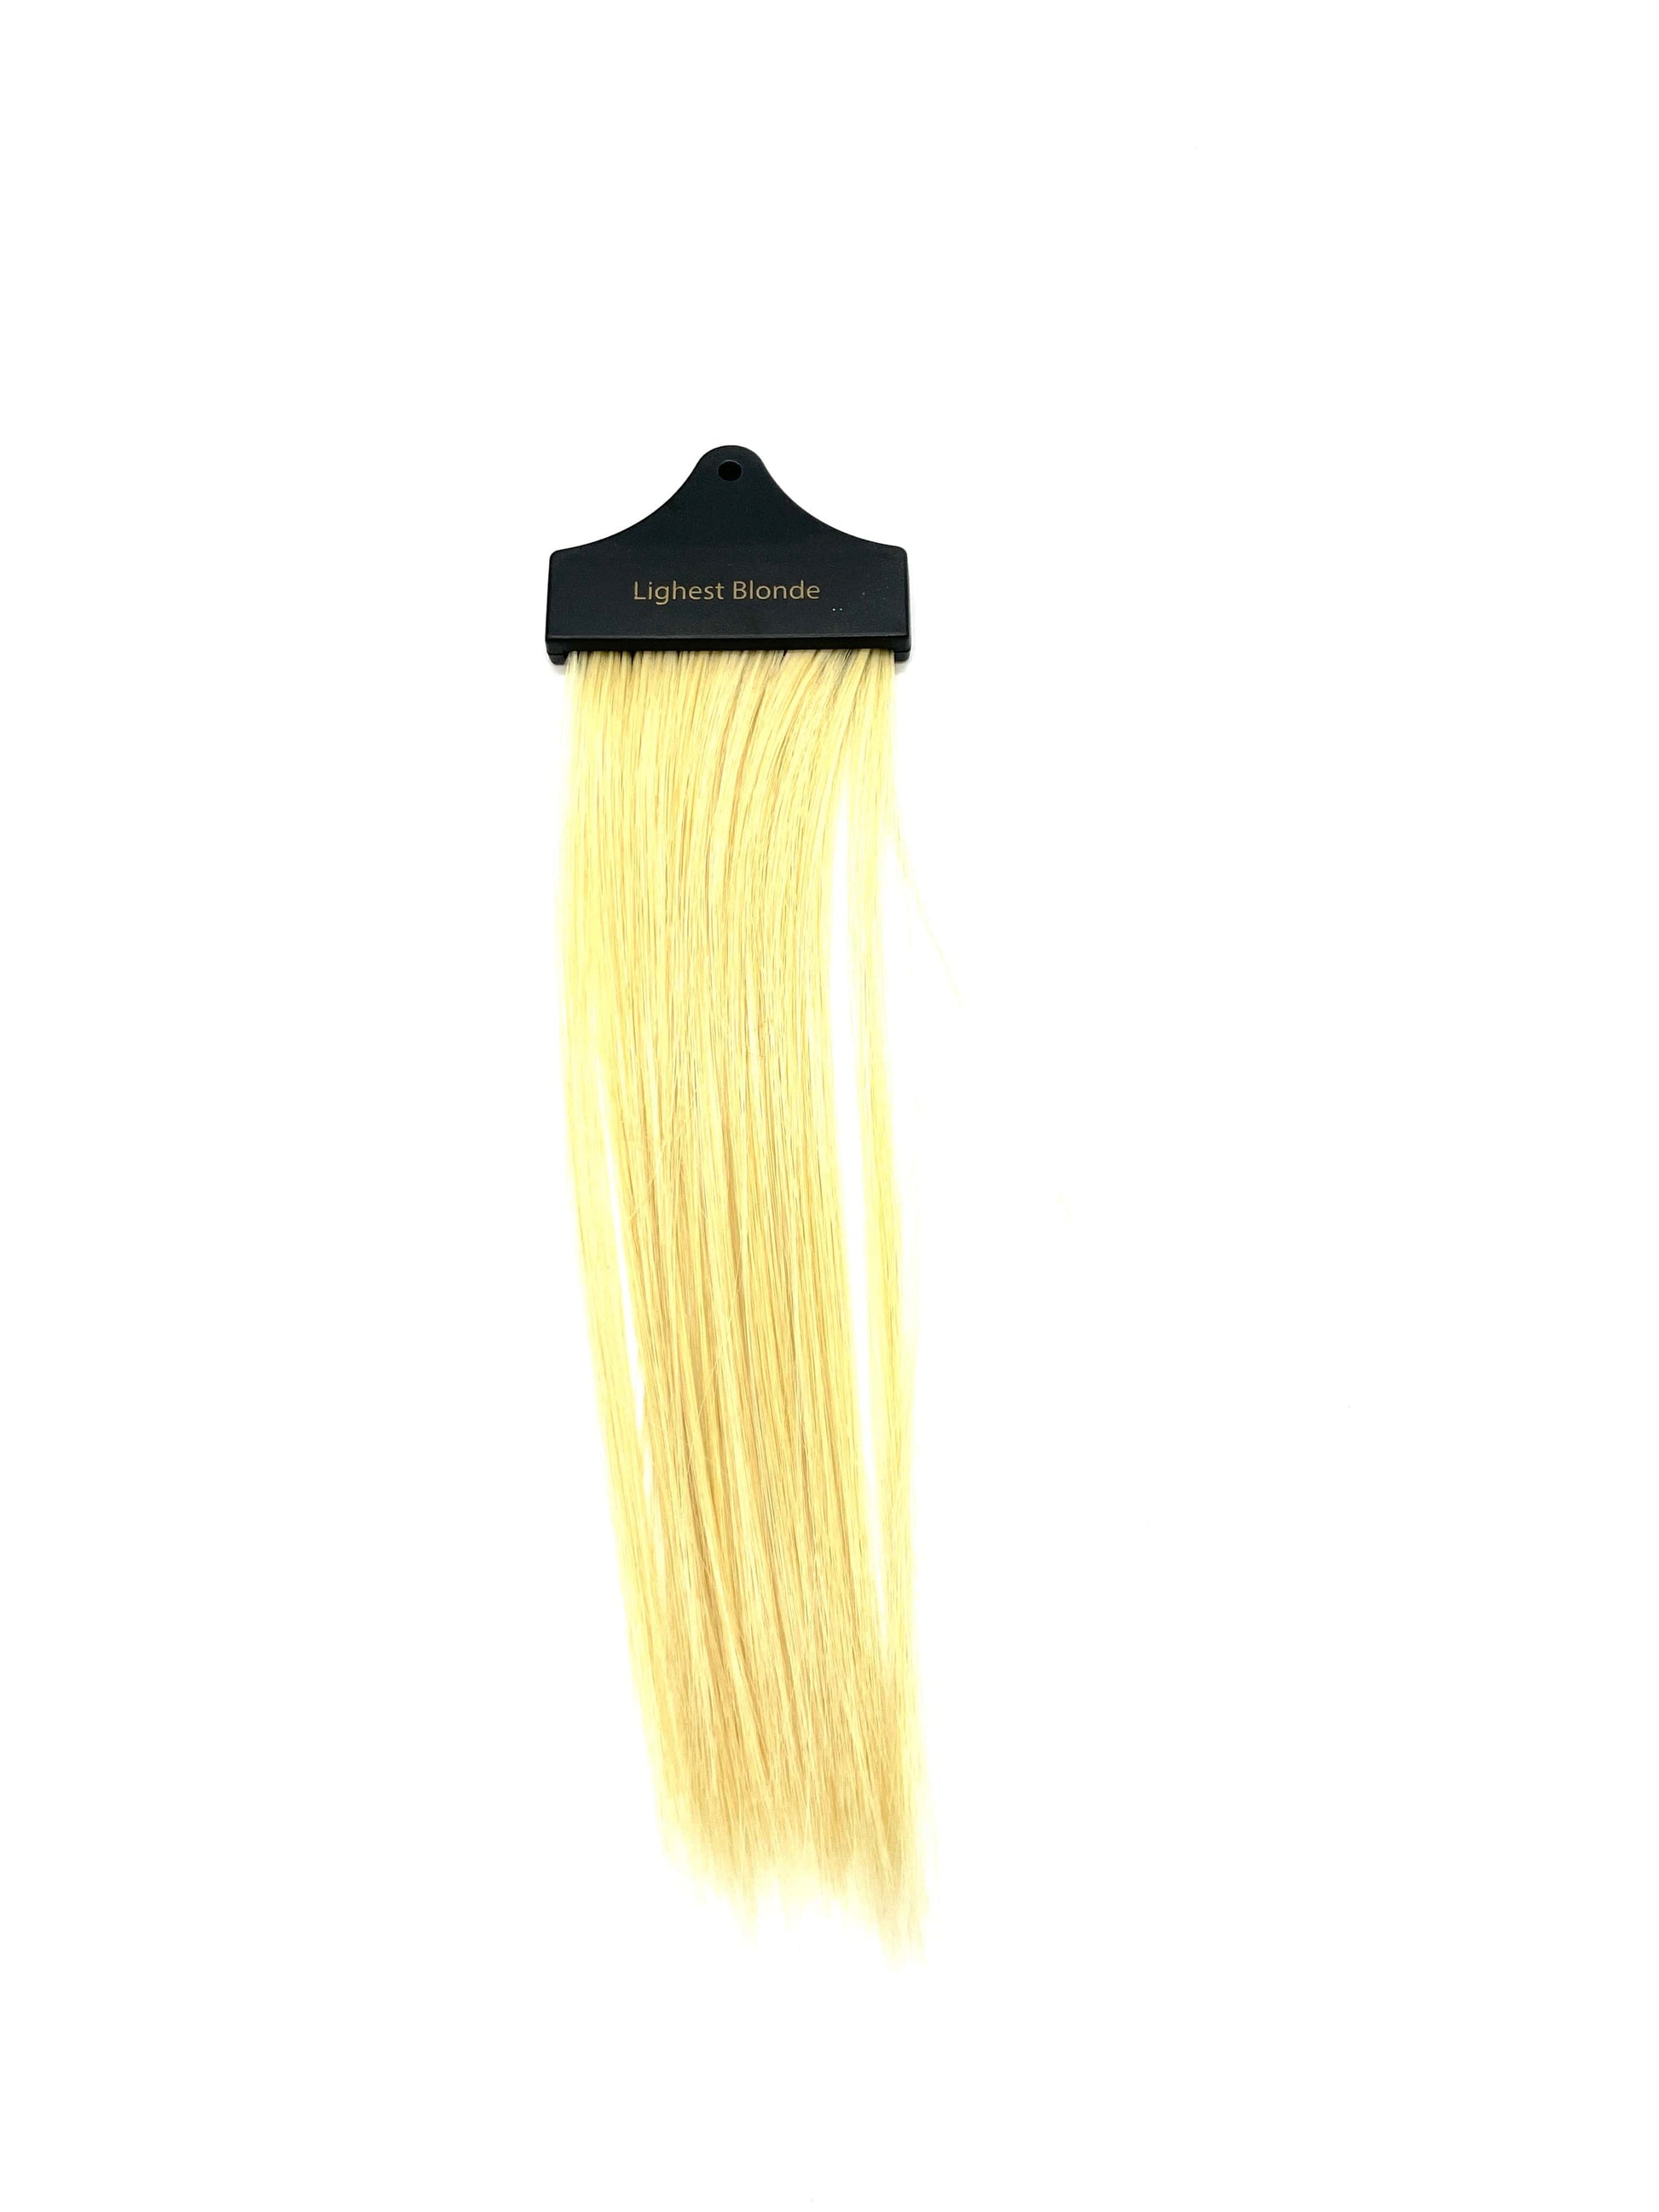 Hair Couture Avanti One Piece Clip In Synthetic Hair 20”